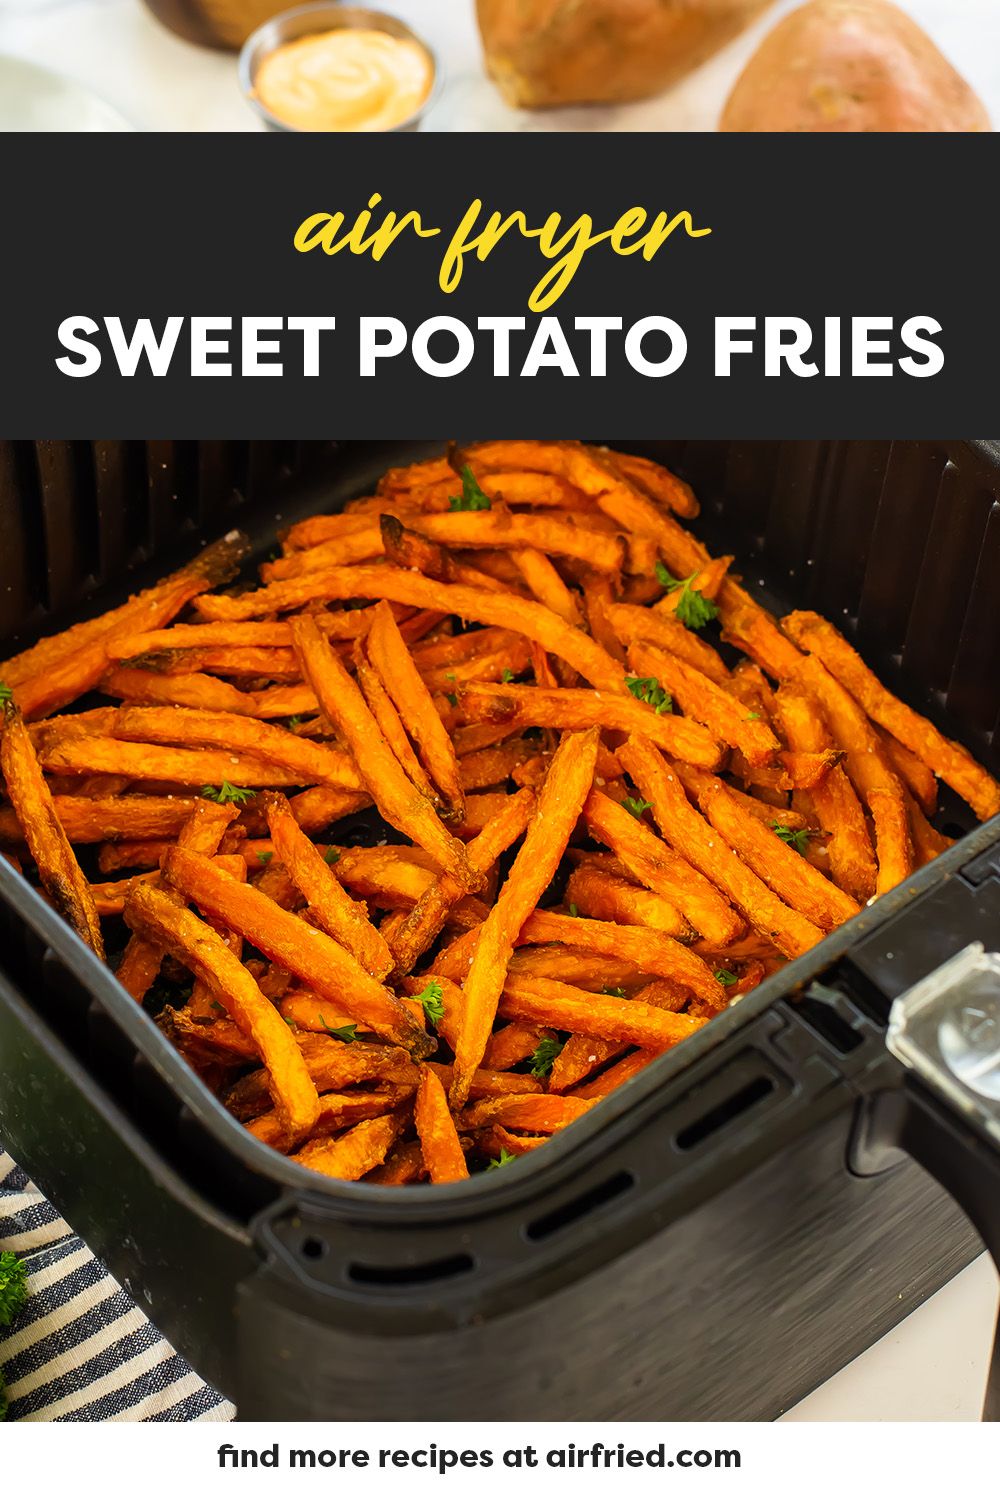 We took frozen sweet potato fries and cooked them to a crispy perfection in our air fryer with this recipe!